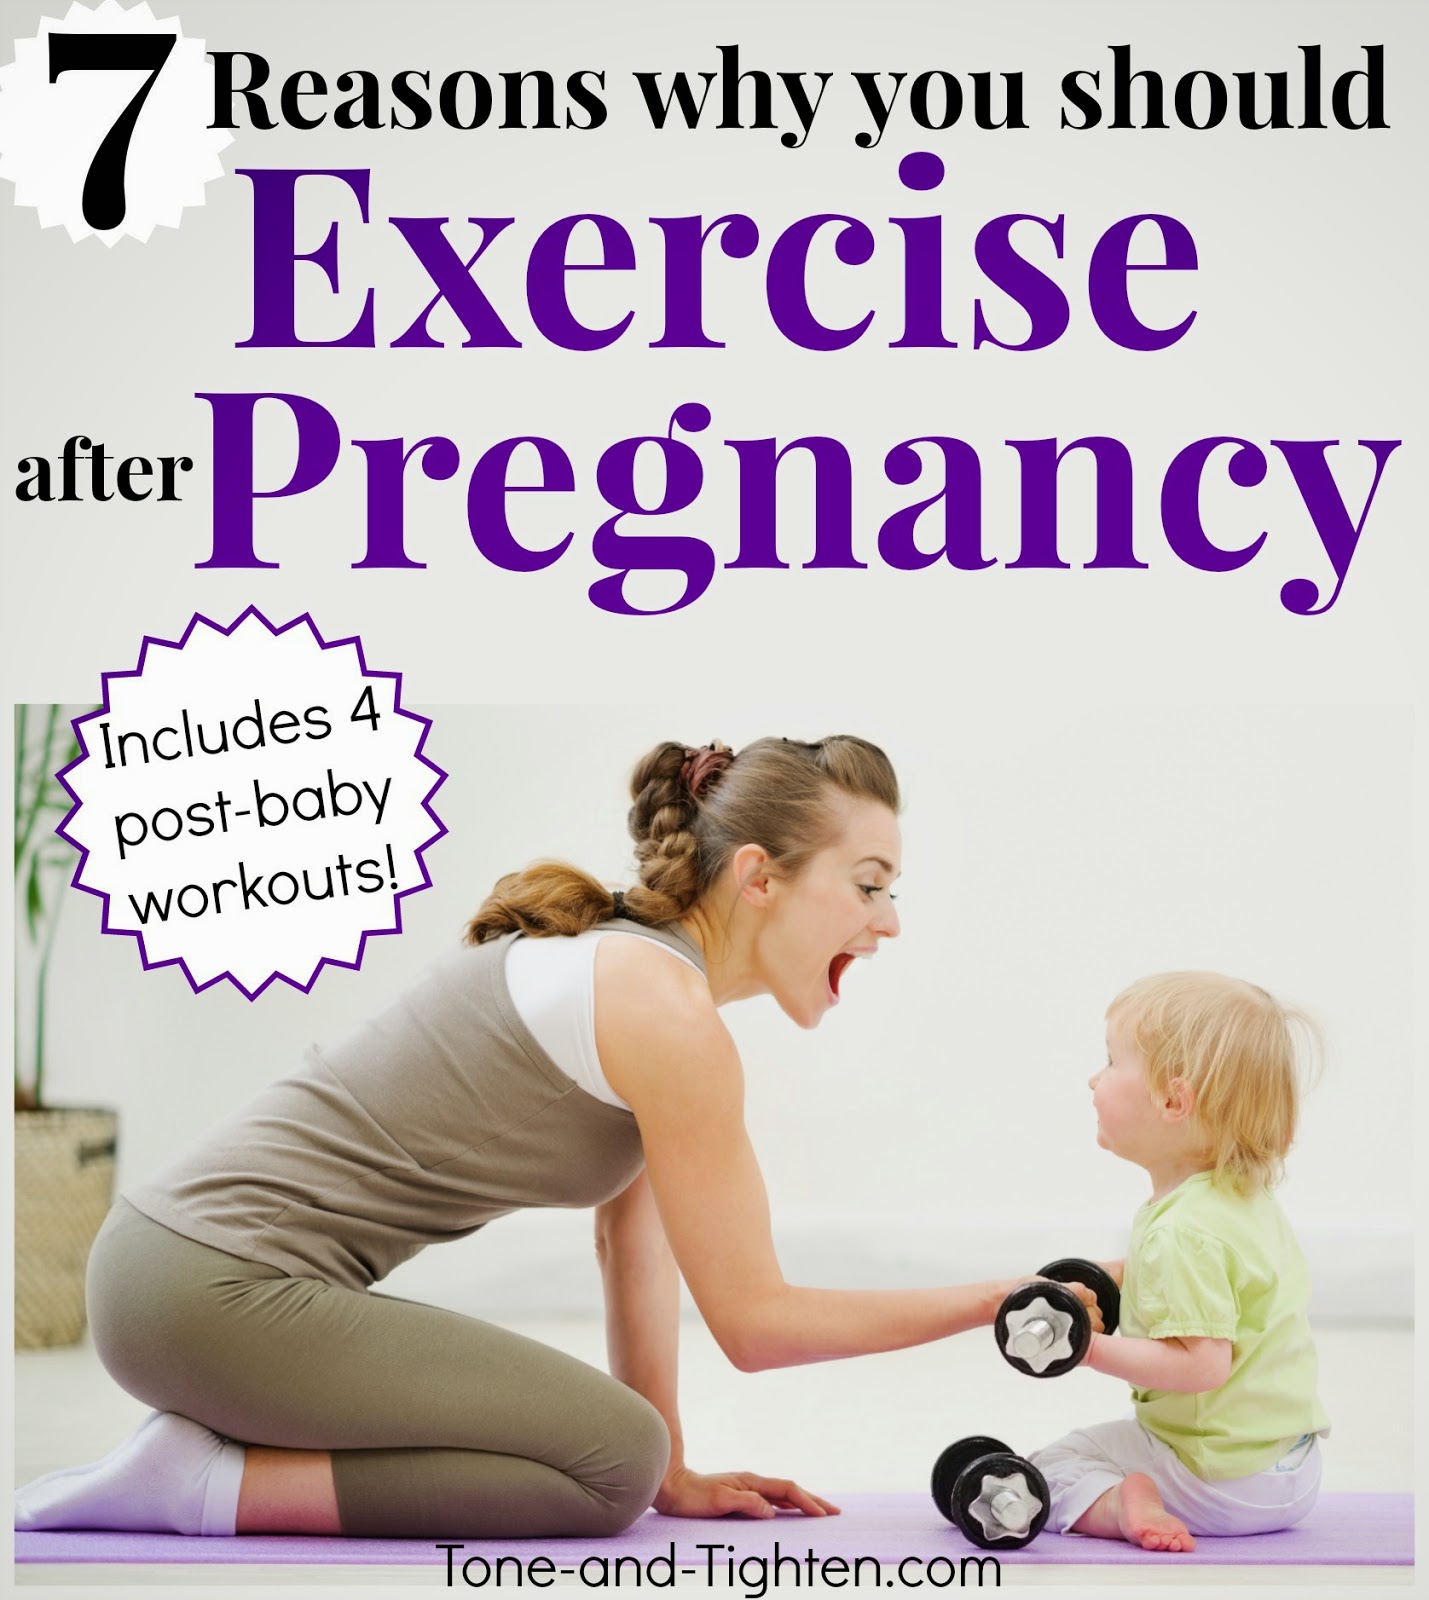 Top 7 Reasons to Exercise After Pregnancy – So much more than fitting back into skinny jeans!